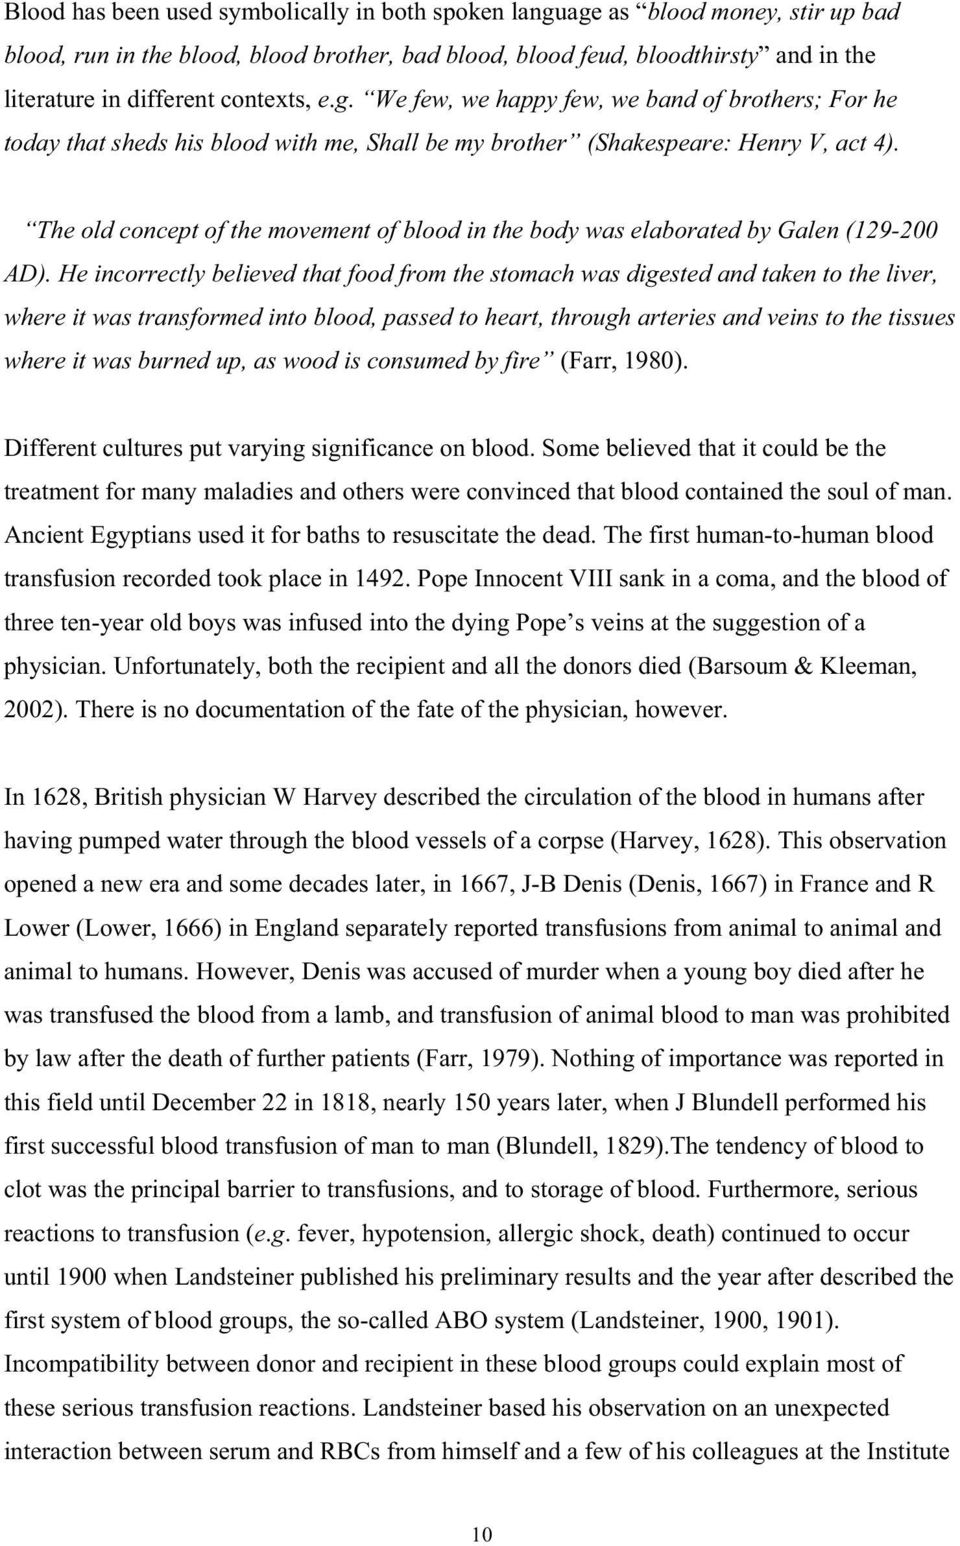 The old concept of the movement of blood in the body was elaborated by Galen (129-200 AD).